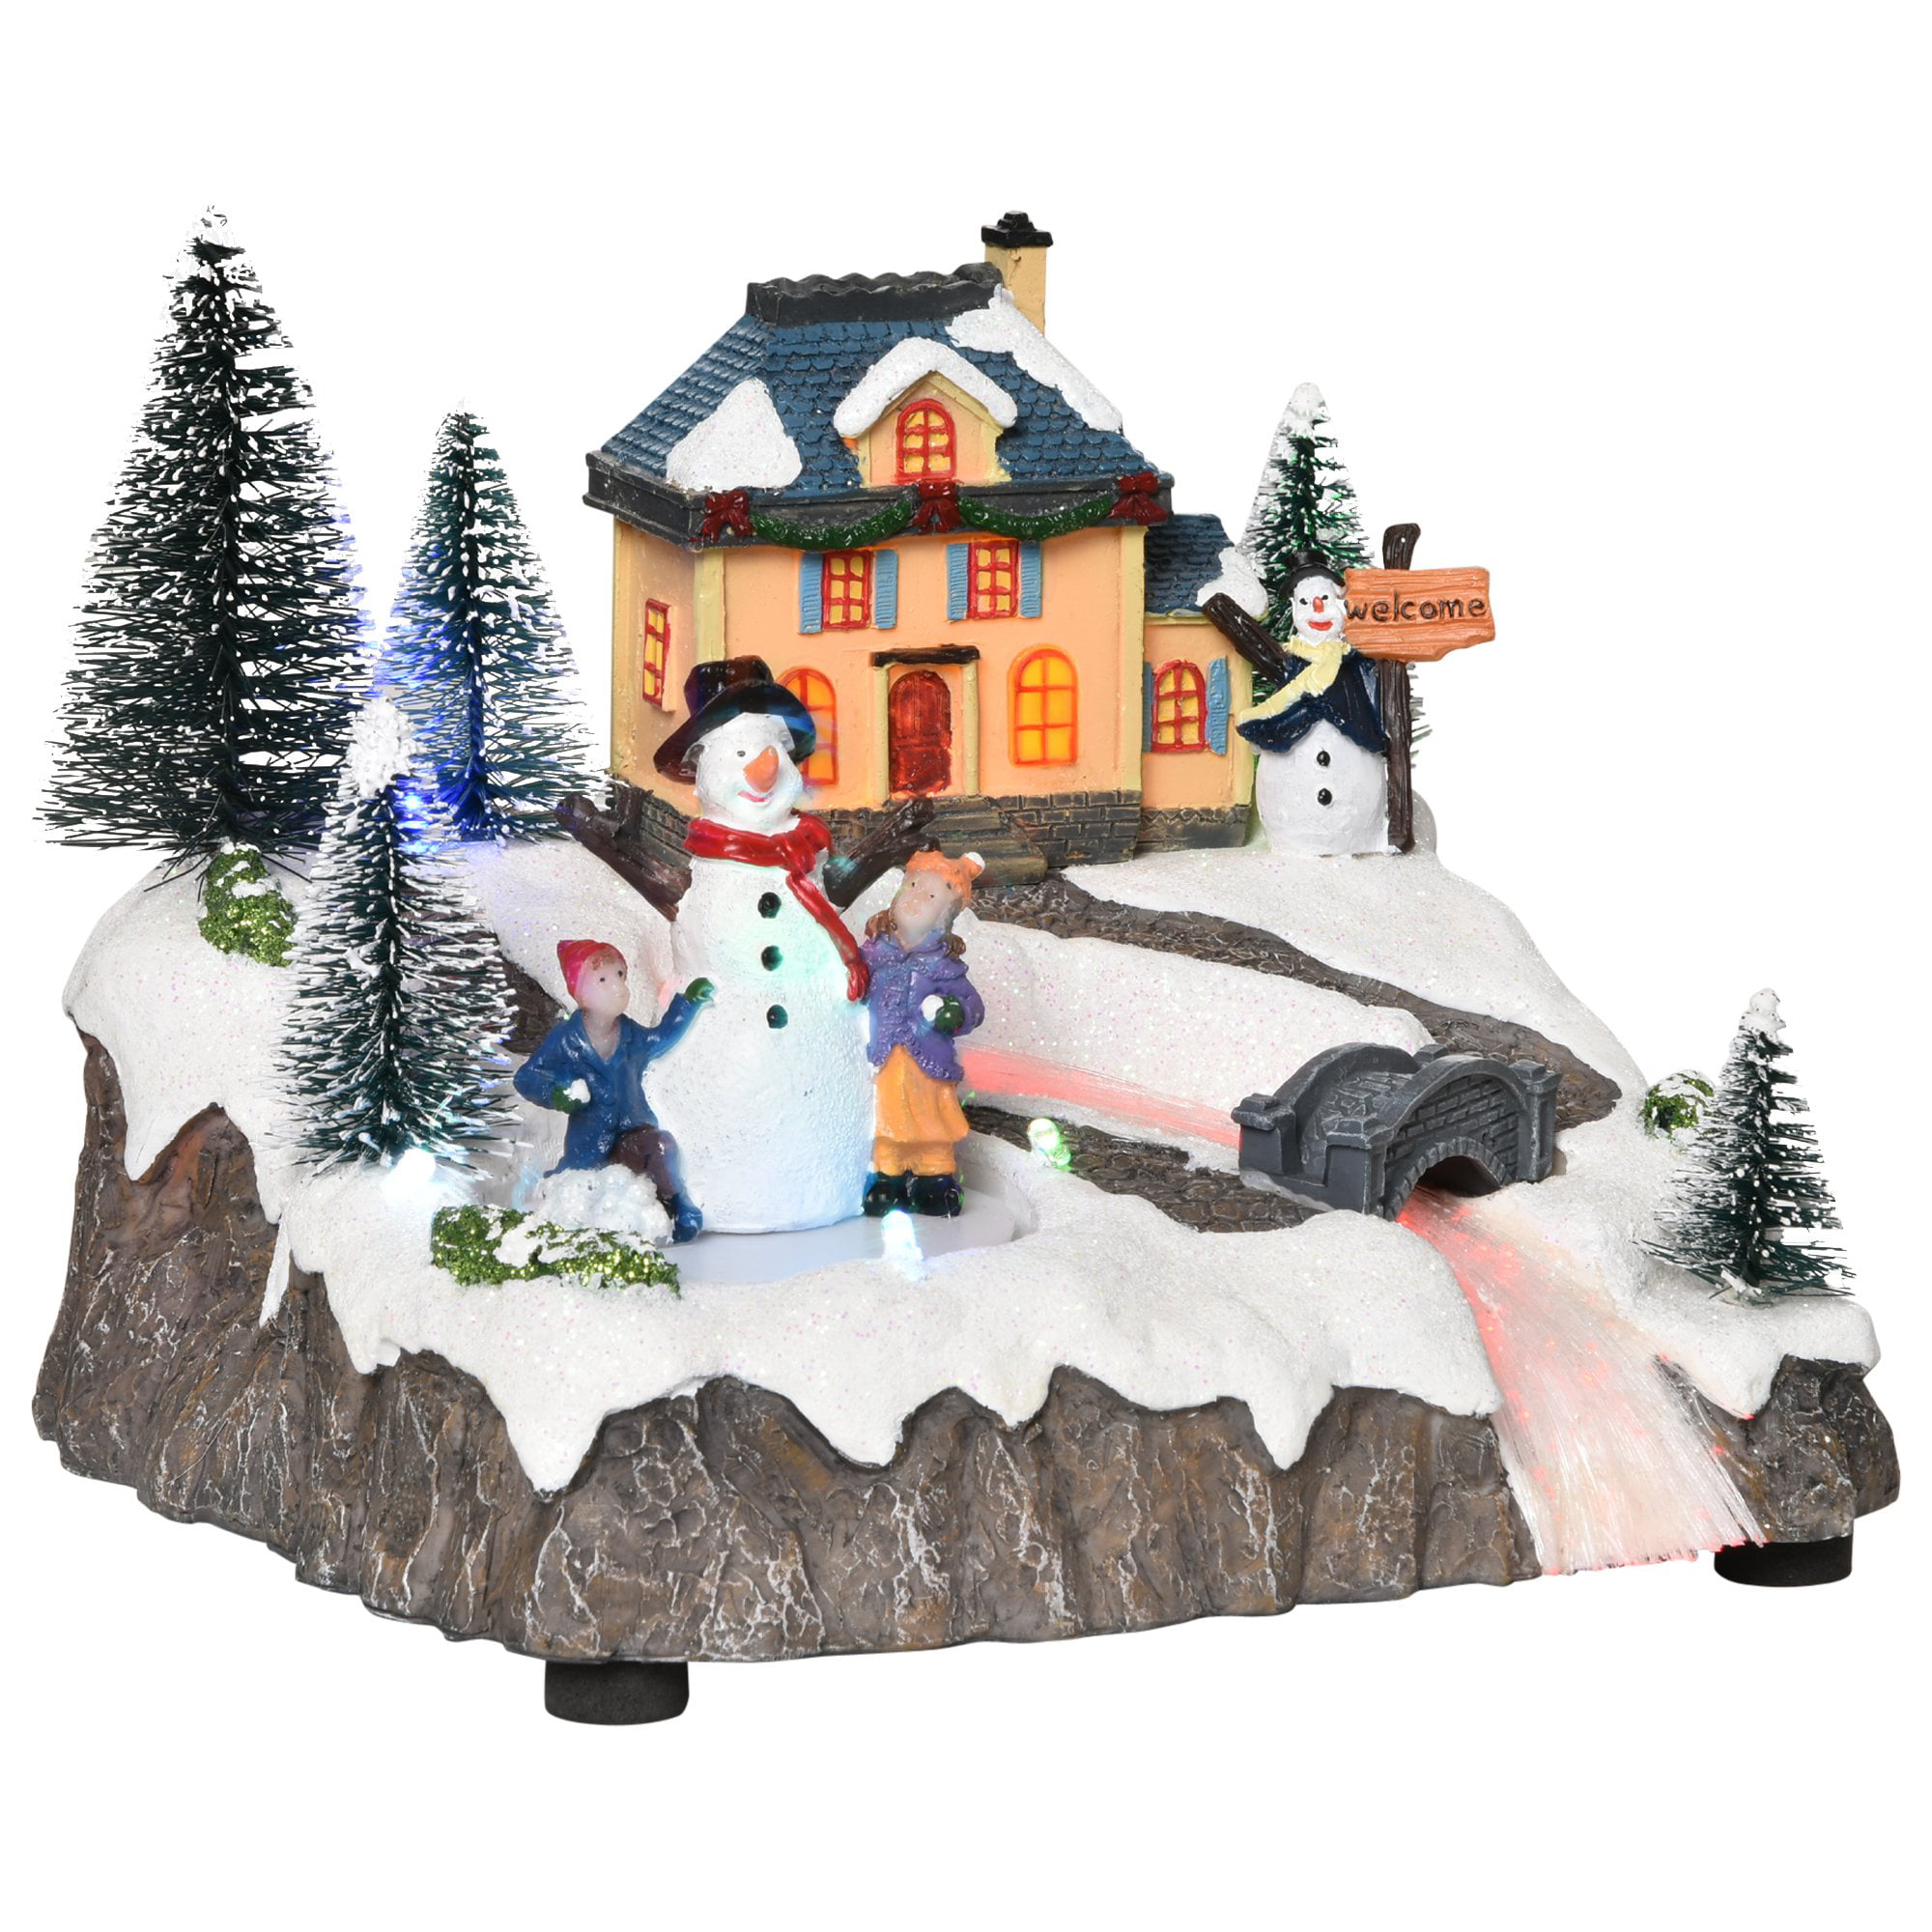 Reproduction Christmas Village Male Figure Skater ice skating train layout 